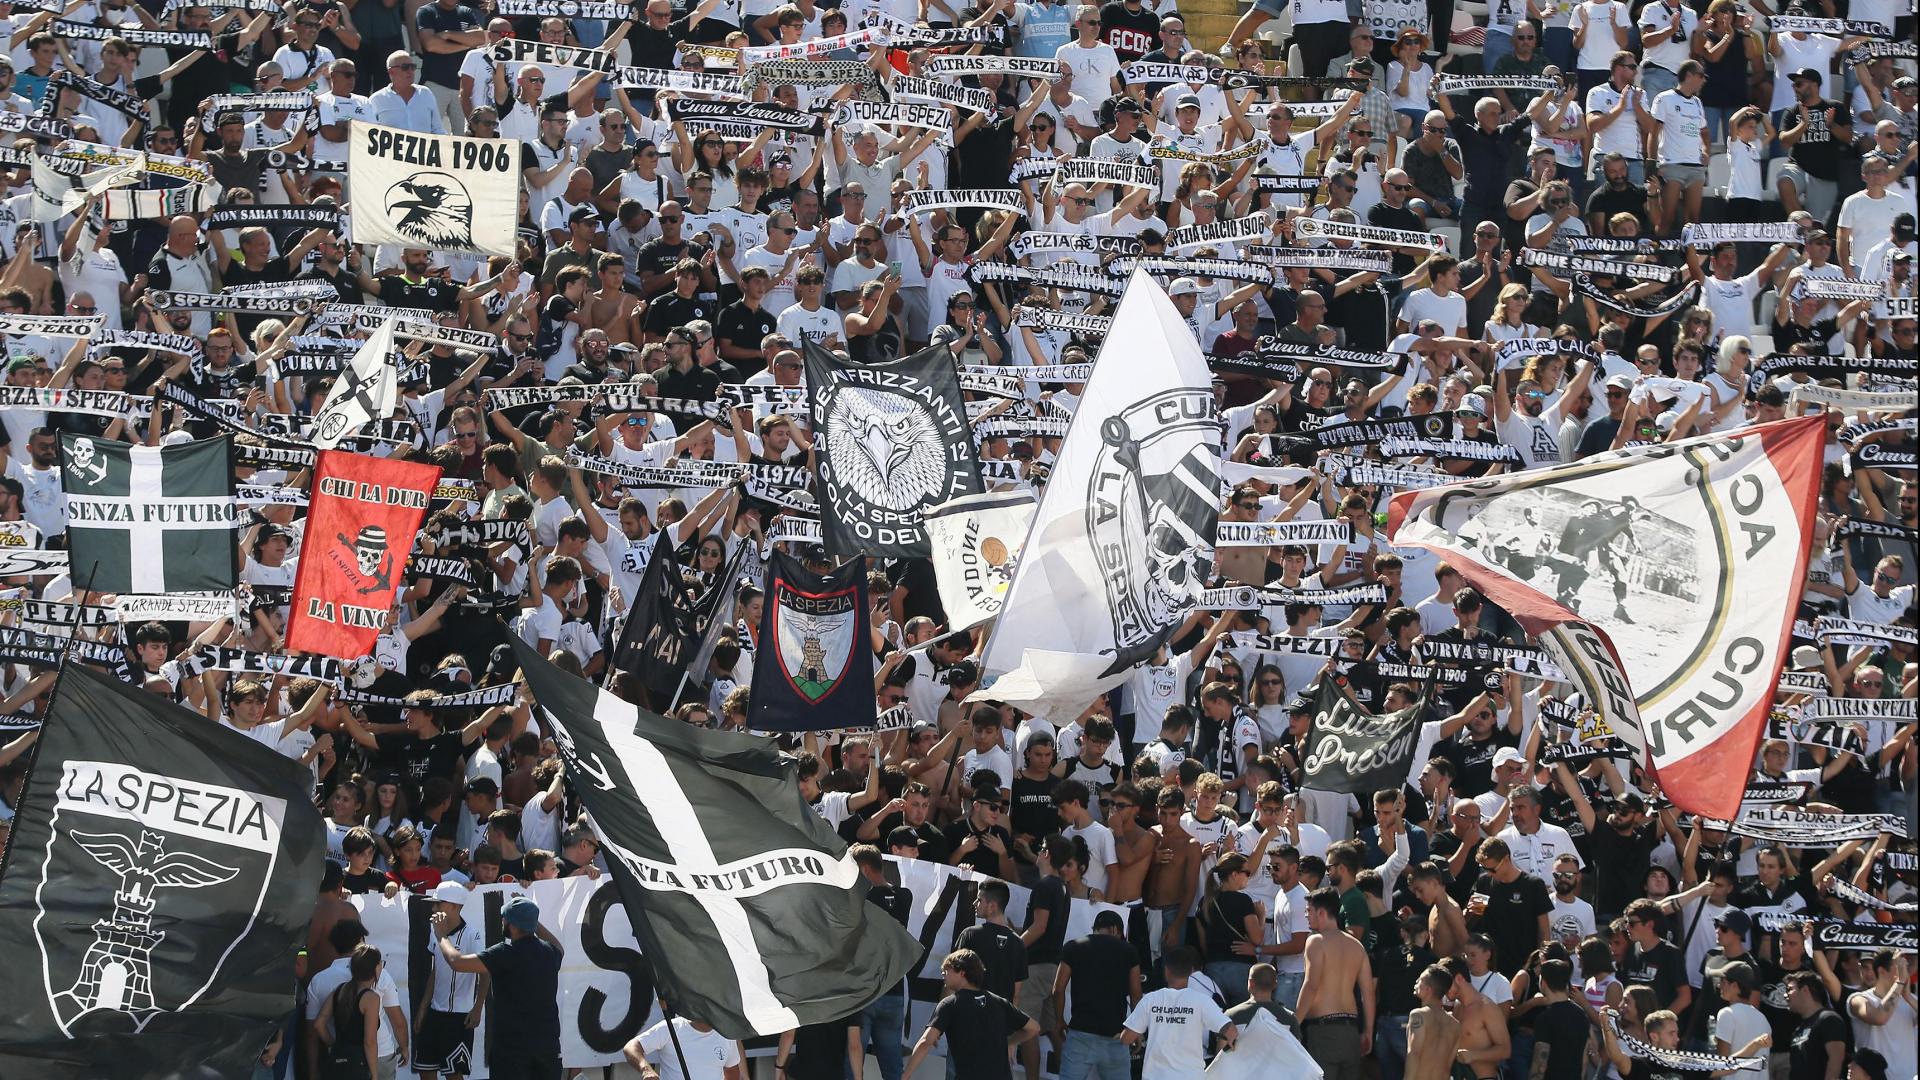 Spezia-Cremonese: promotions "Families at the Picco" & "Grandparents' day"